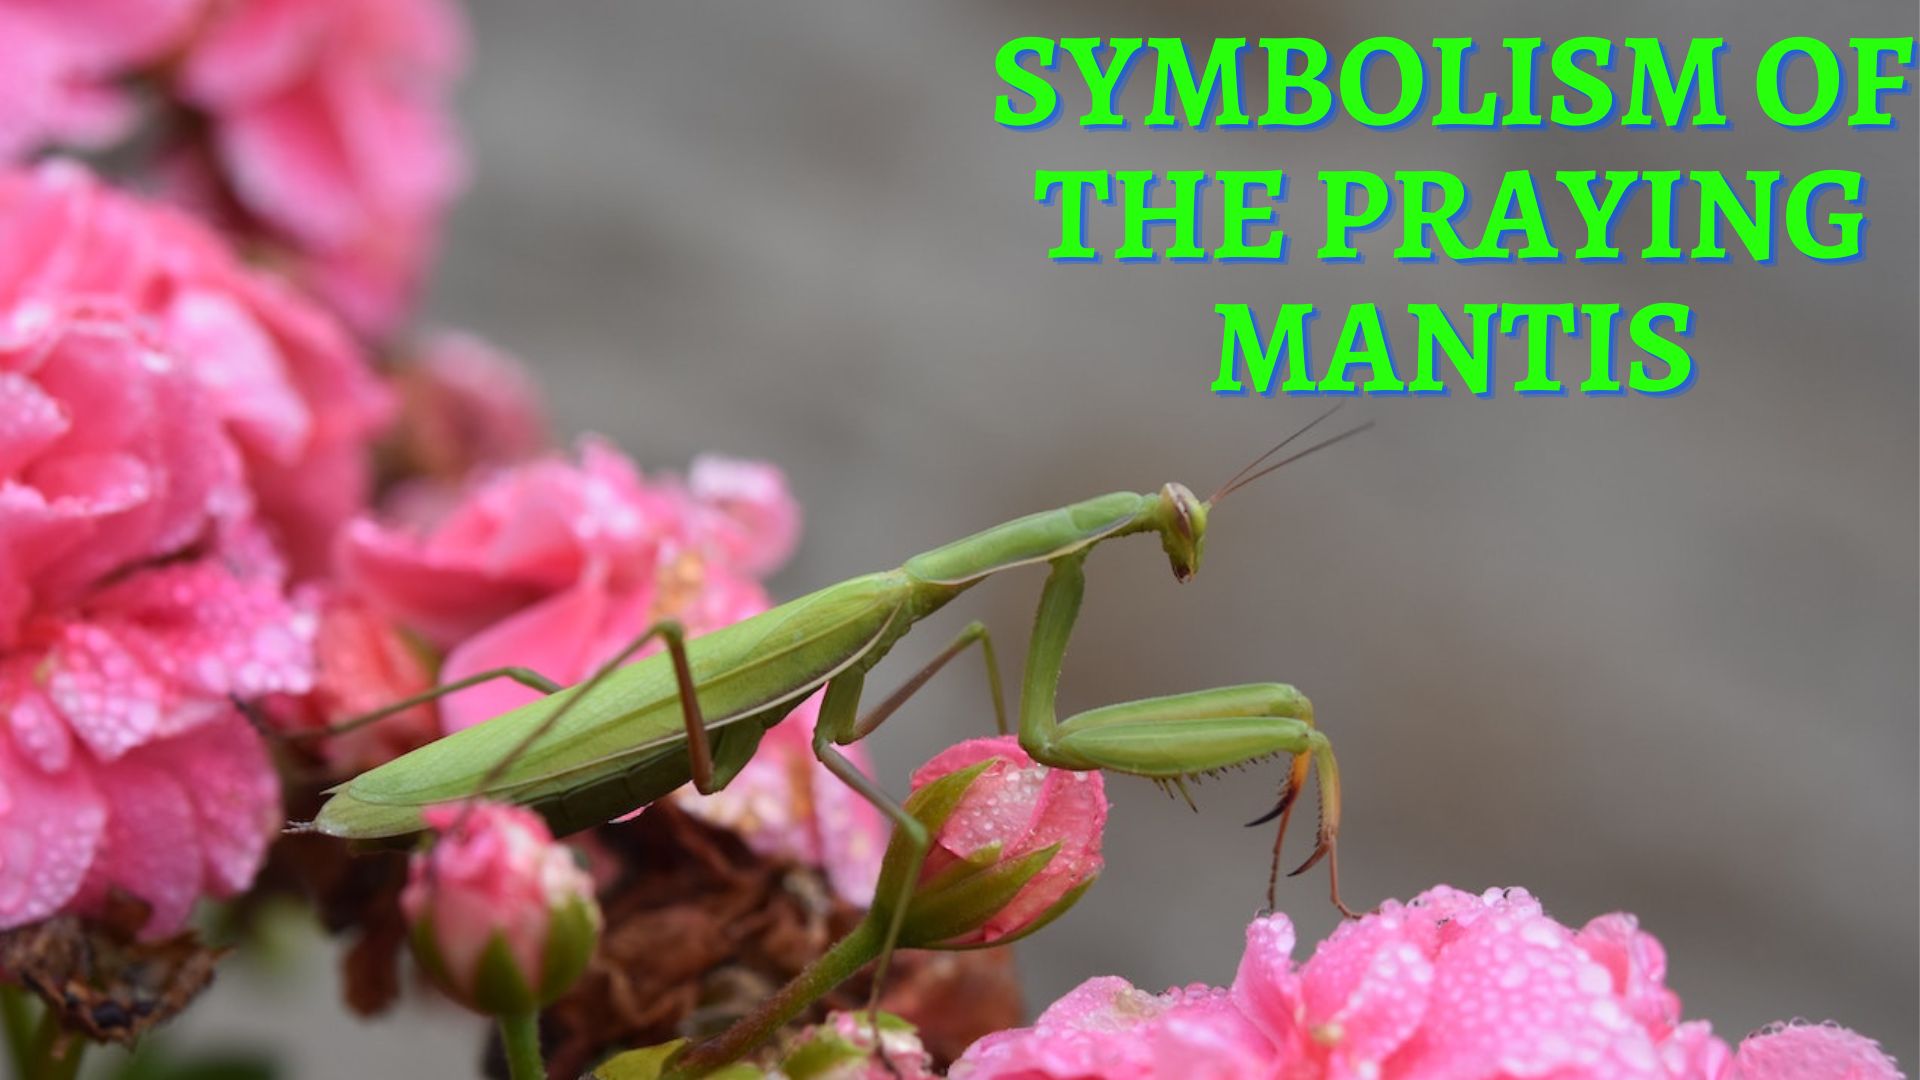 Symbolism Of The Praying Mantis - A Sign Of Good Luck Or Fortune